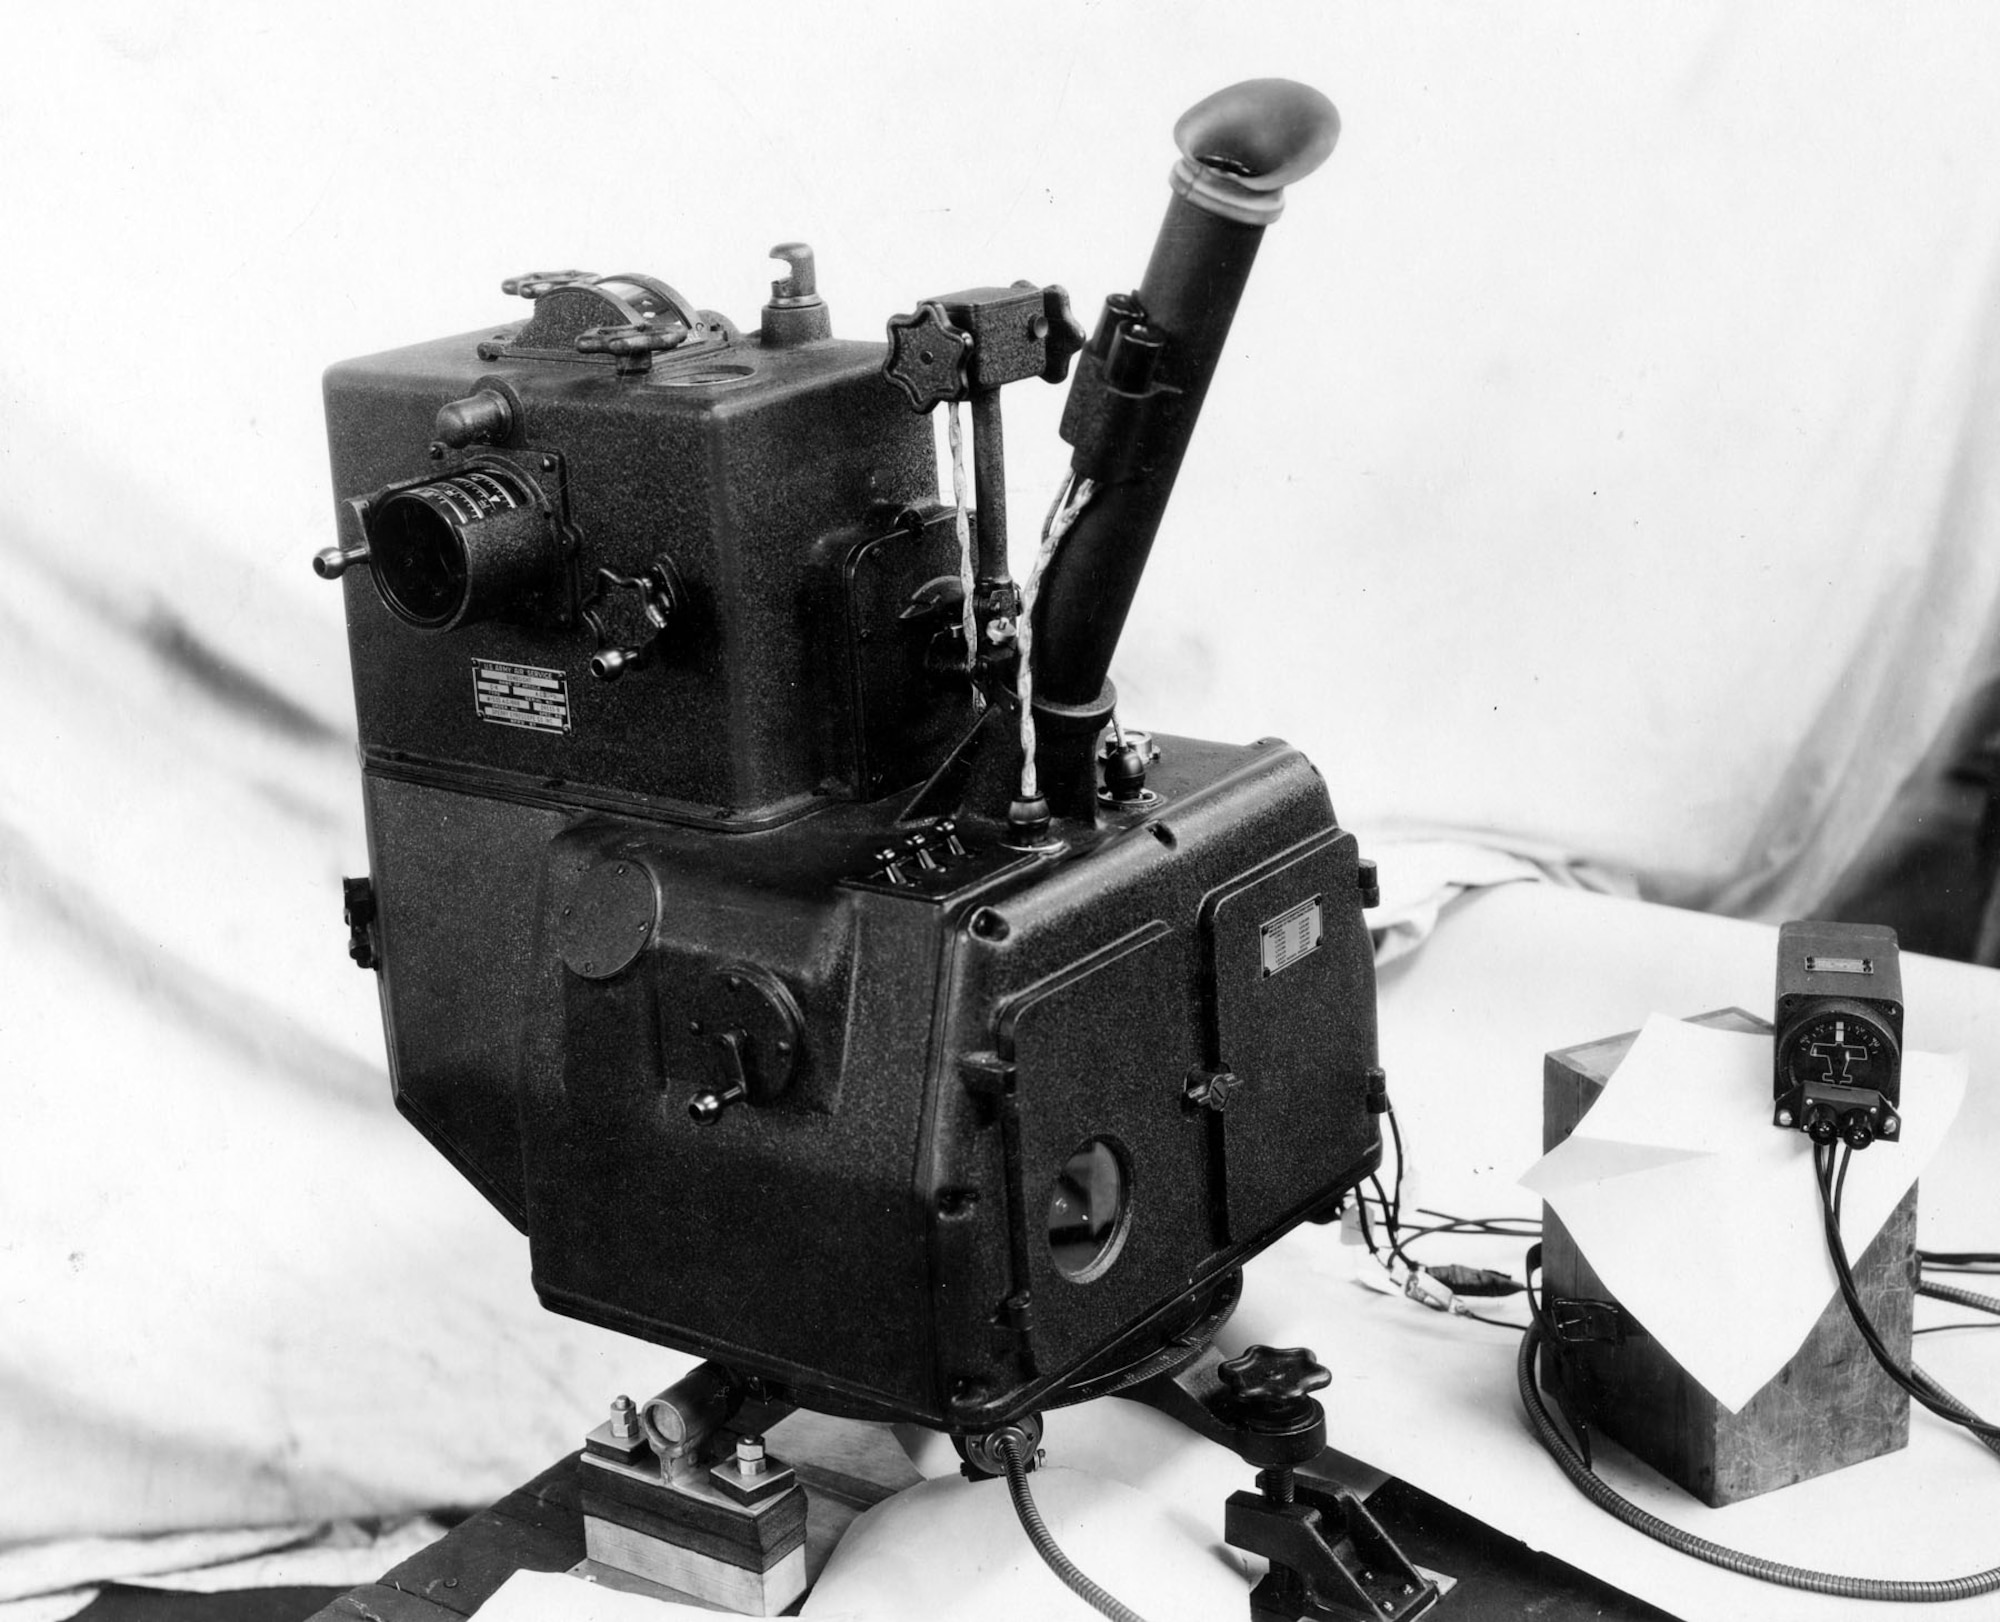 Sperry Gyroscope continued designing bombsights throughout the 1920s, but none proved satisfactory to the Army. The Sperry C-4 bombsight of 1932 could not match the accuracy of the Norden bombsights under development for the U.S. Navy. (U.S. Air Force photo)